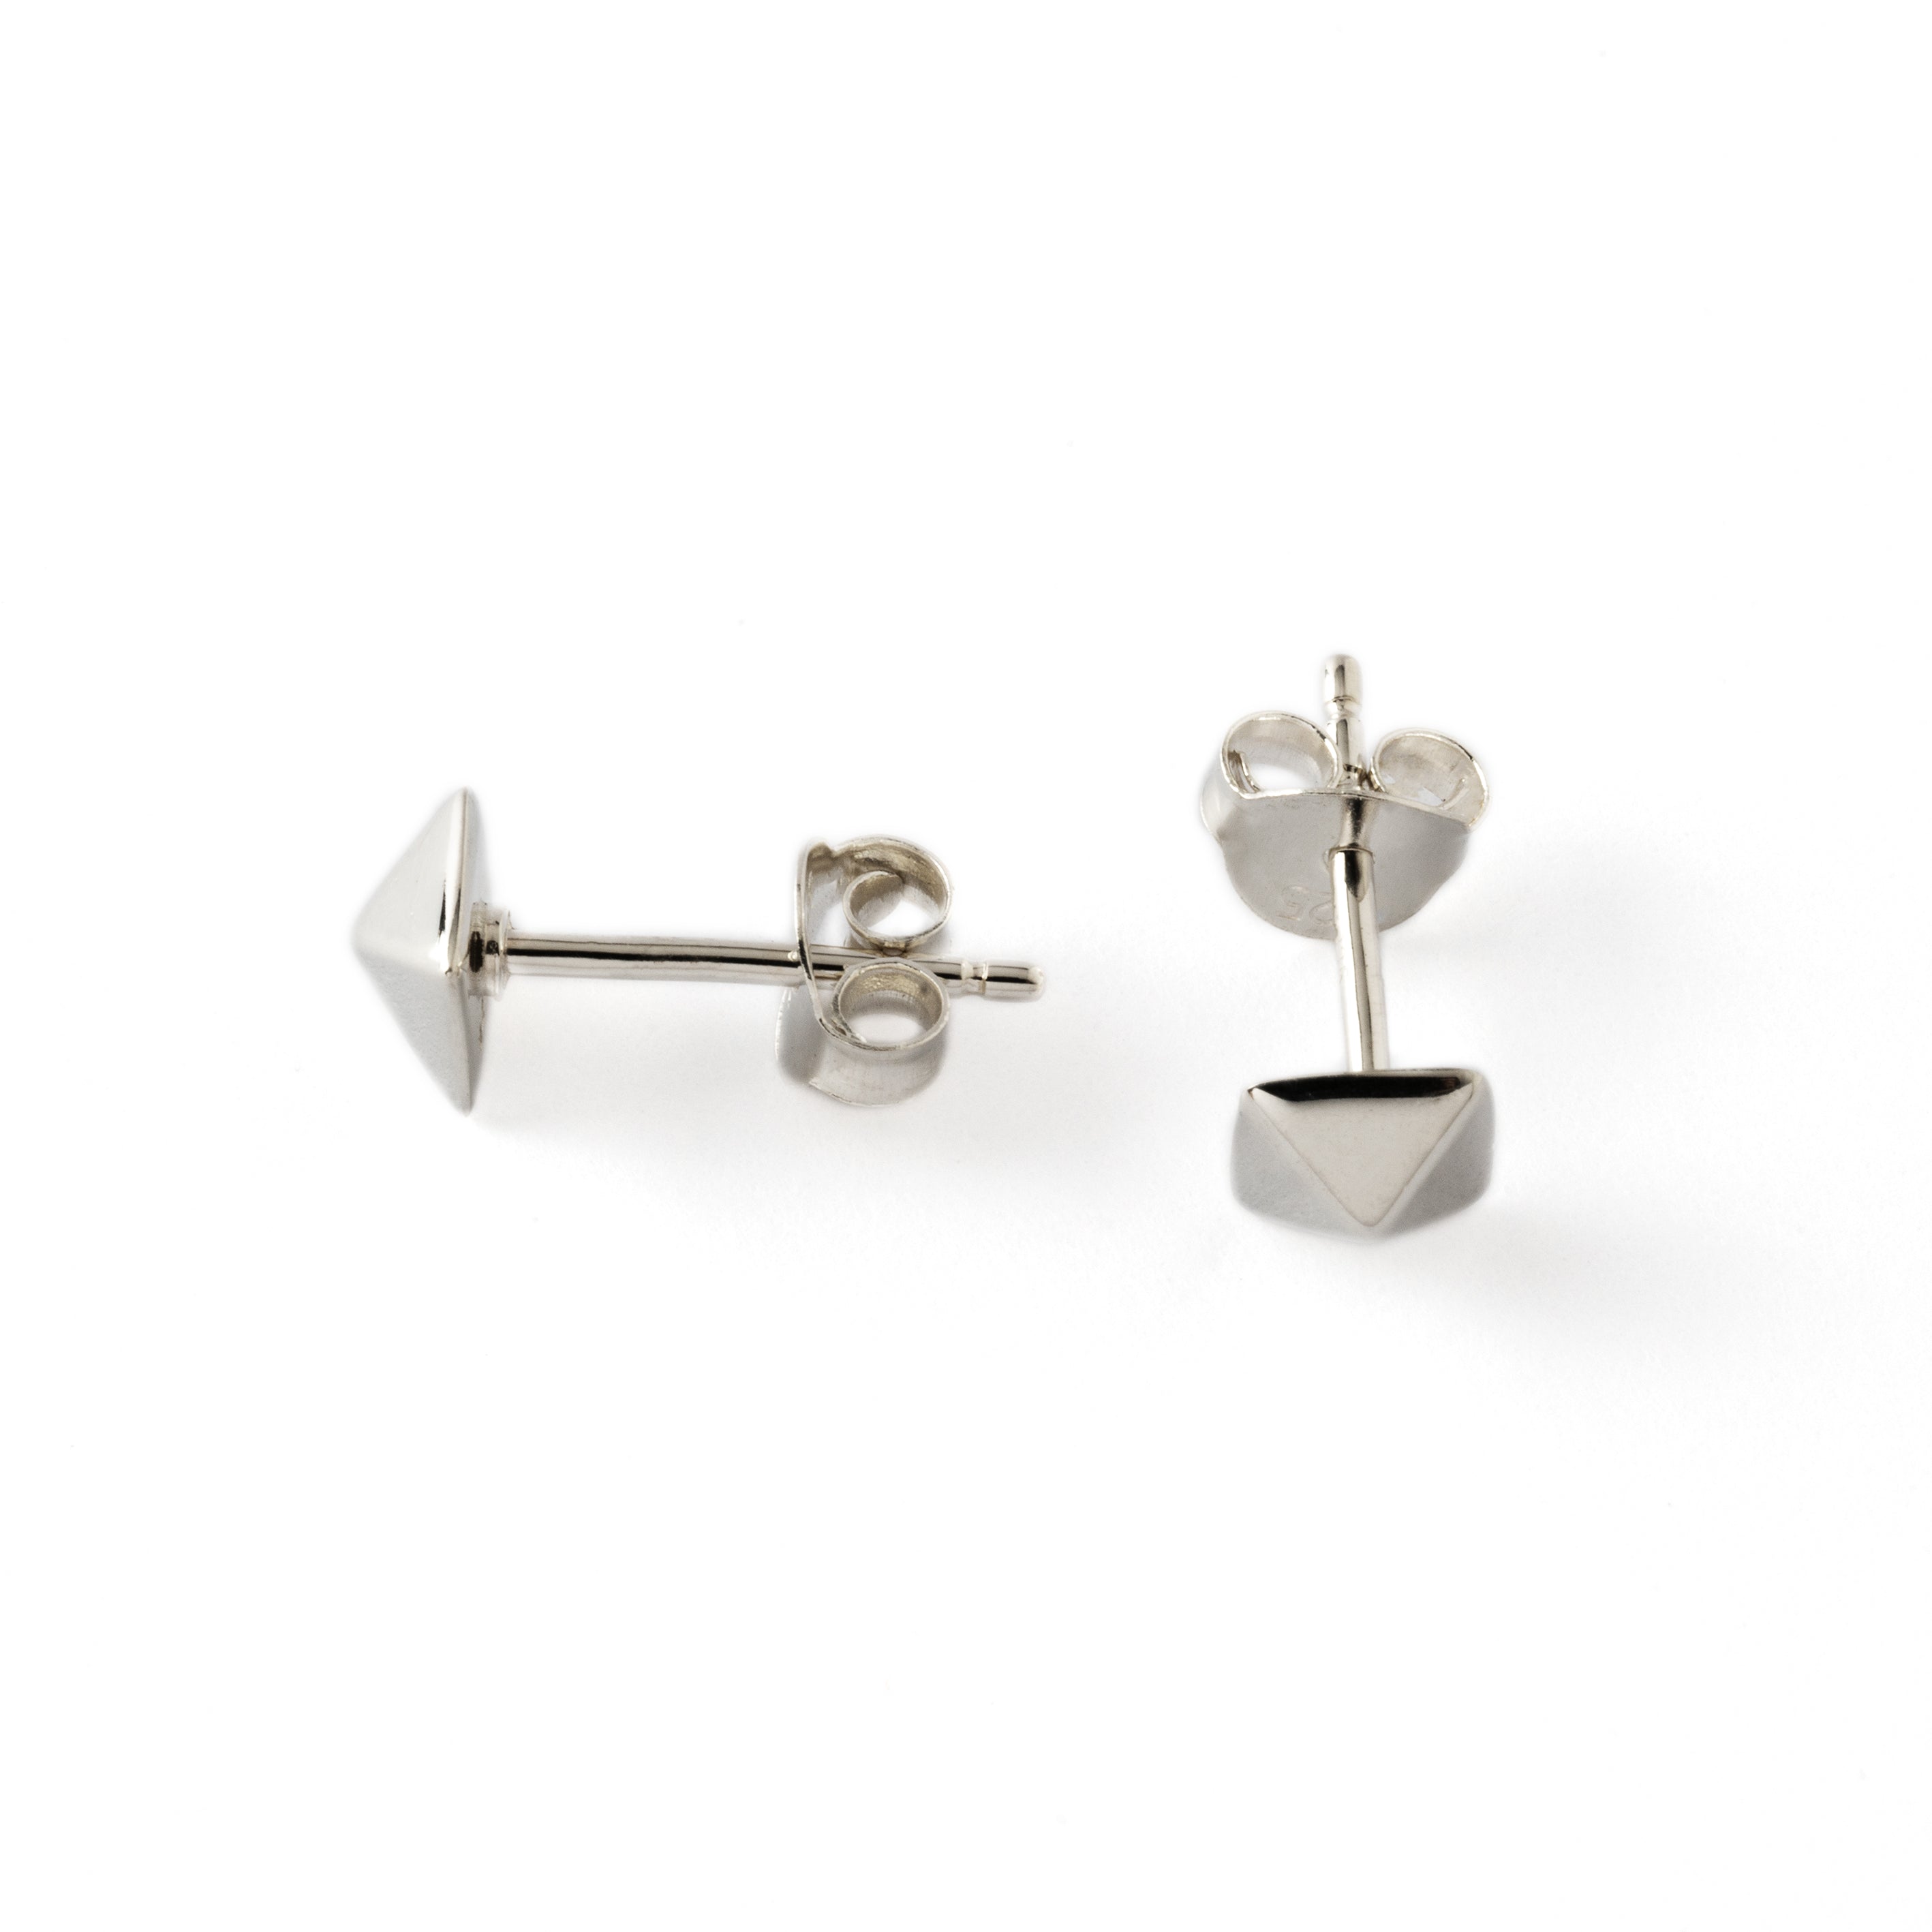 pair of Silver pyramid ear studs left side and front view